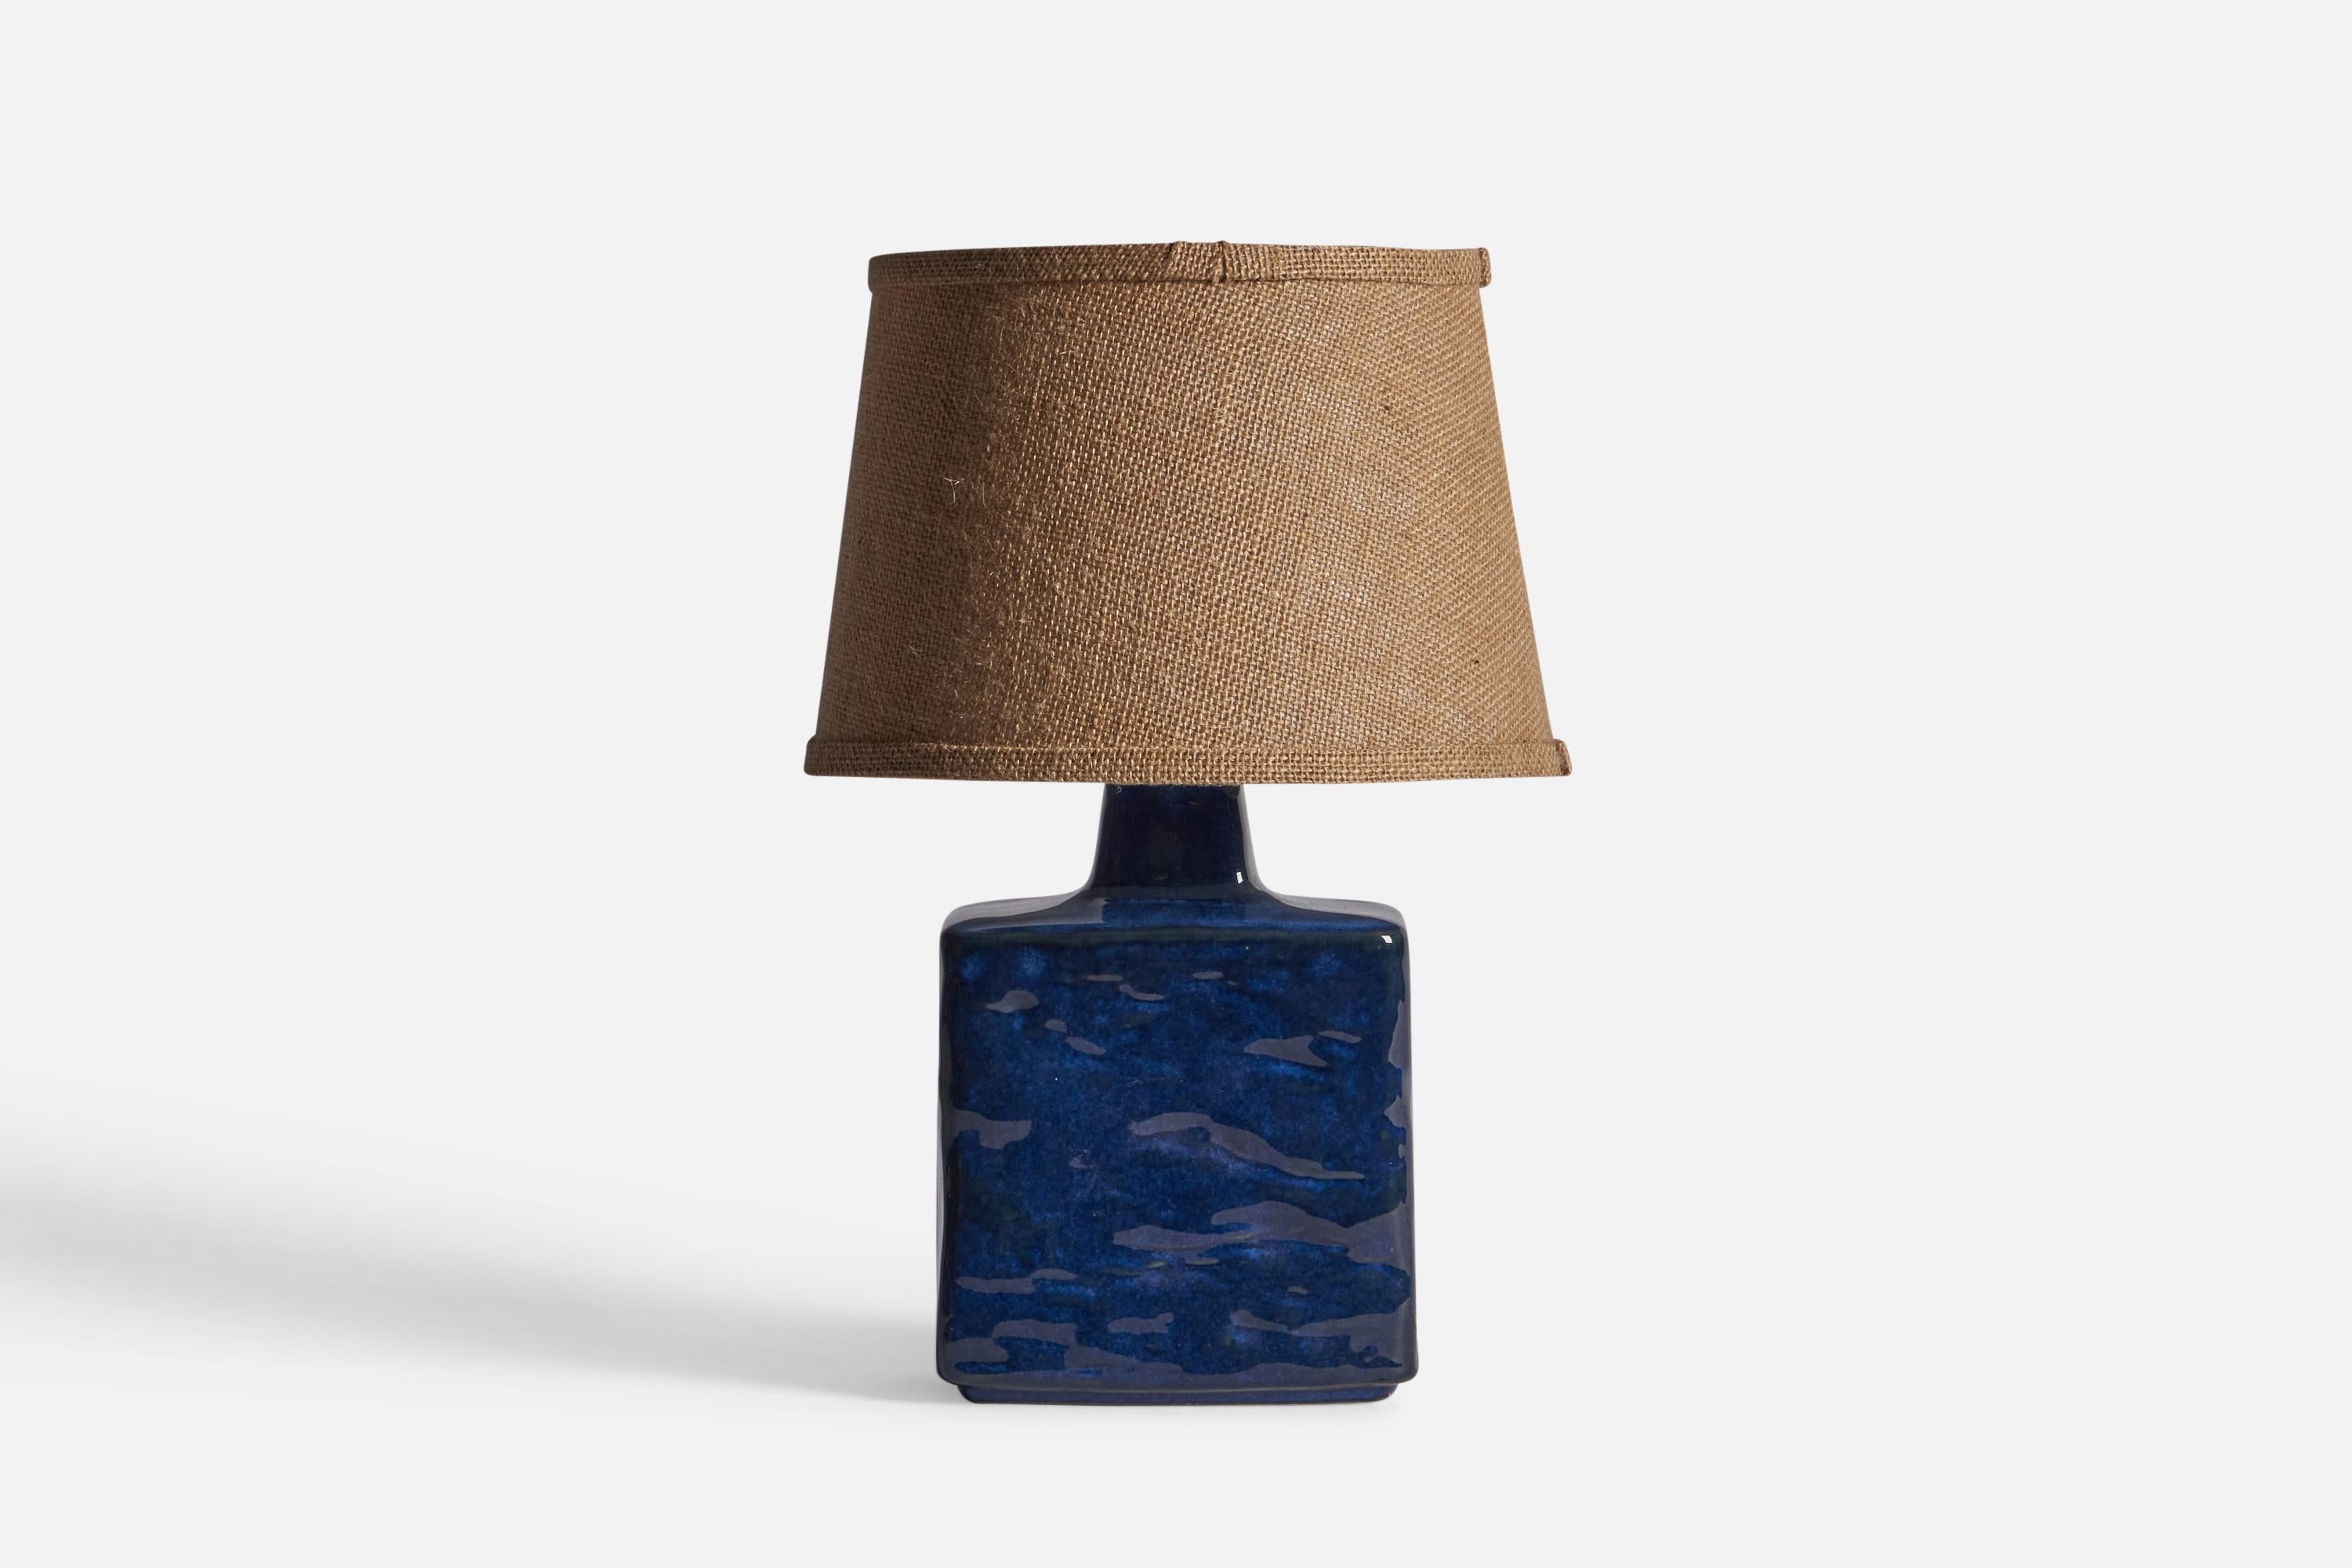 A blue-glazed stoneware lamp, designed and produced by Desiree Stentøj, Denmark, c. 1960s.

Dimensions of Lamp (inches): 11.5